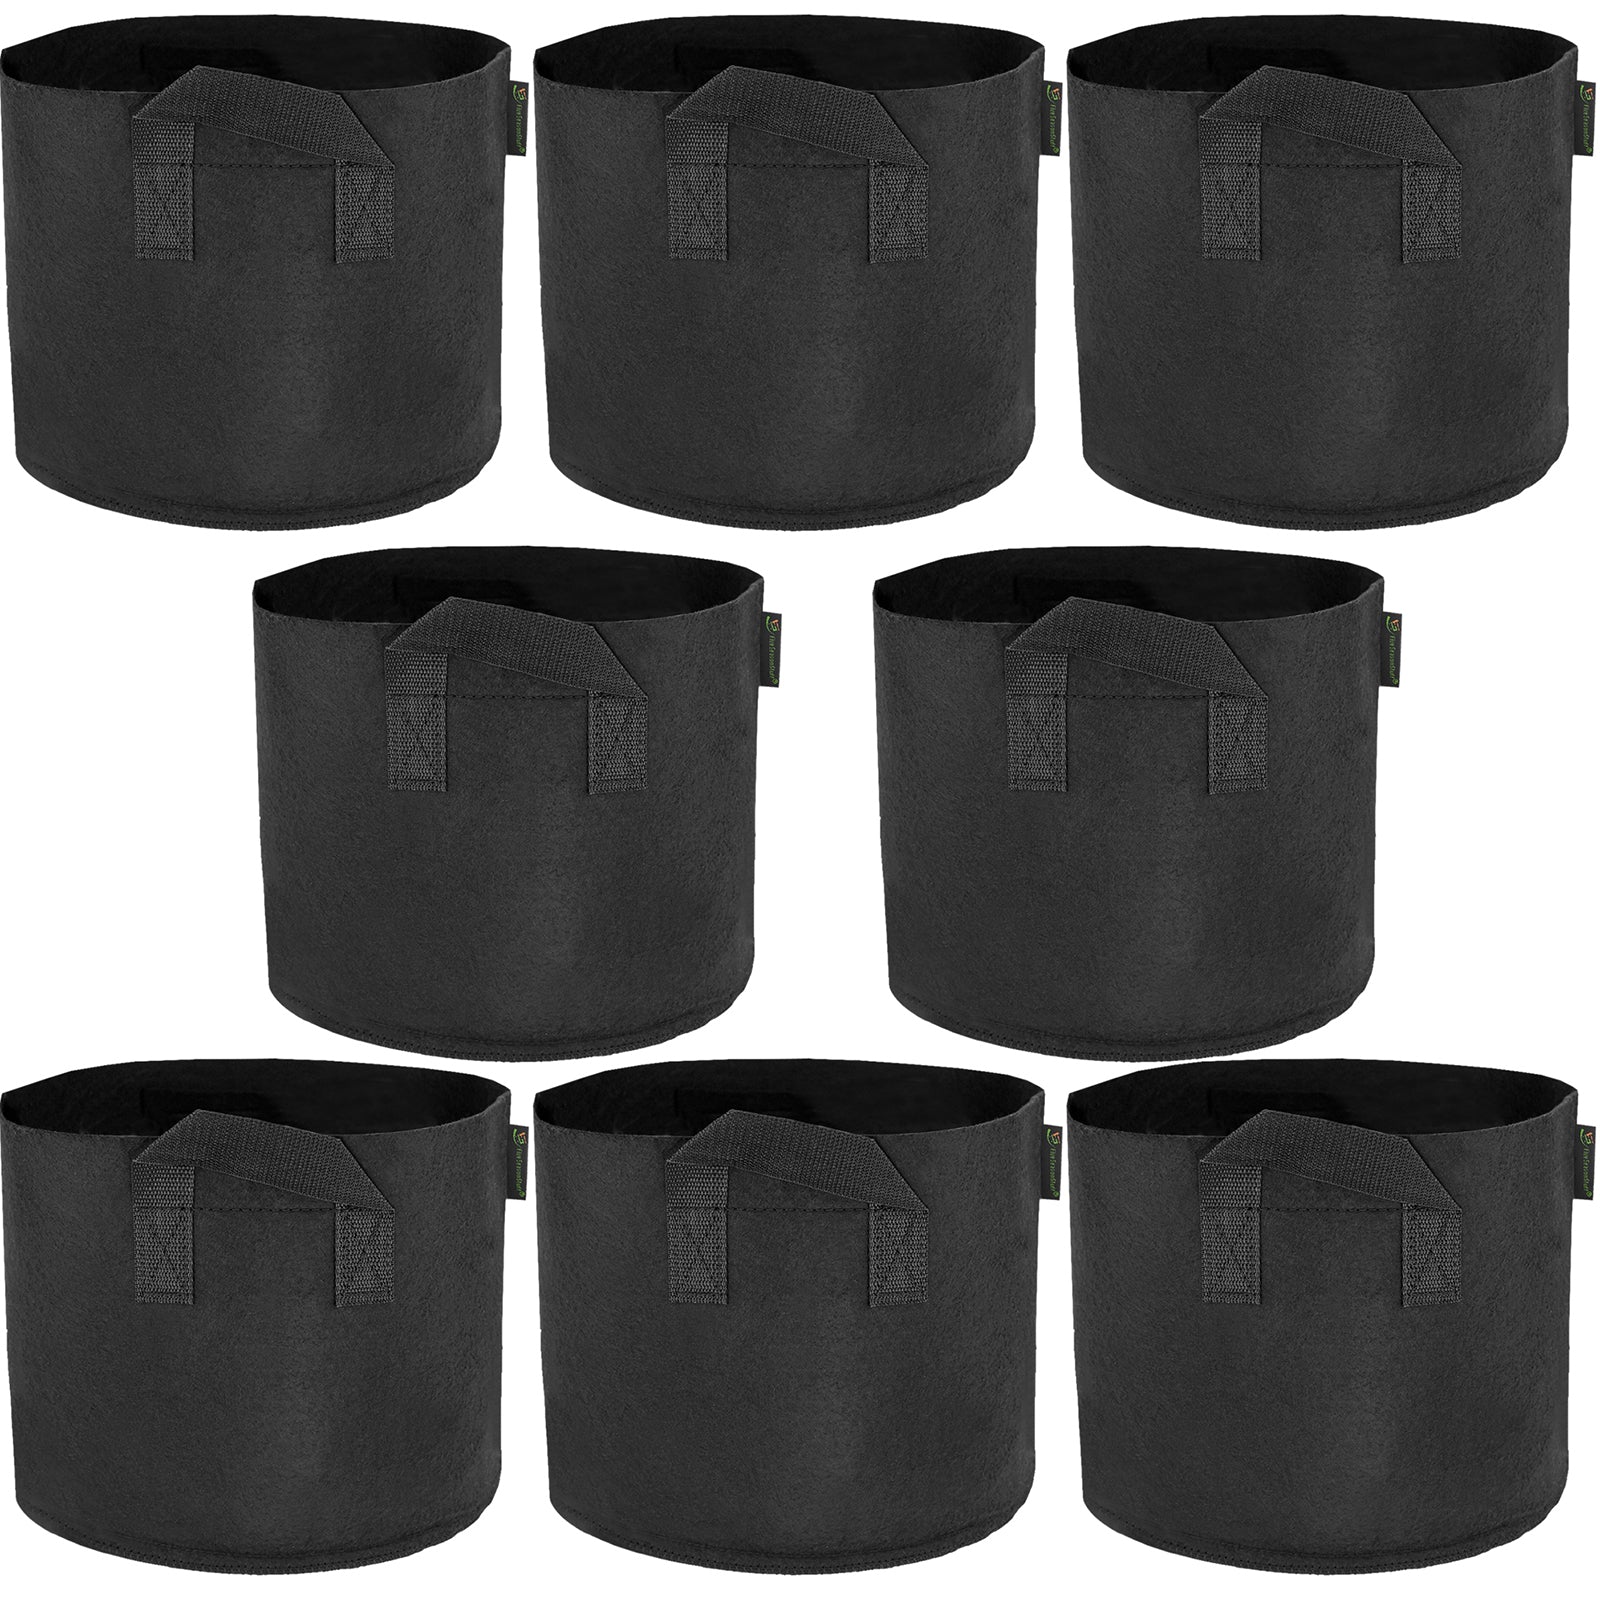 fiveseasonstuff-8-pack-5-gallons-grow-bags-black-breathable-fabric-pots-for-healthier-plants-flowers-heavy-duty-thick-container-with-tear-resistant-handles-aeration-planters-for-smart-gardening